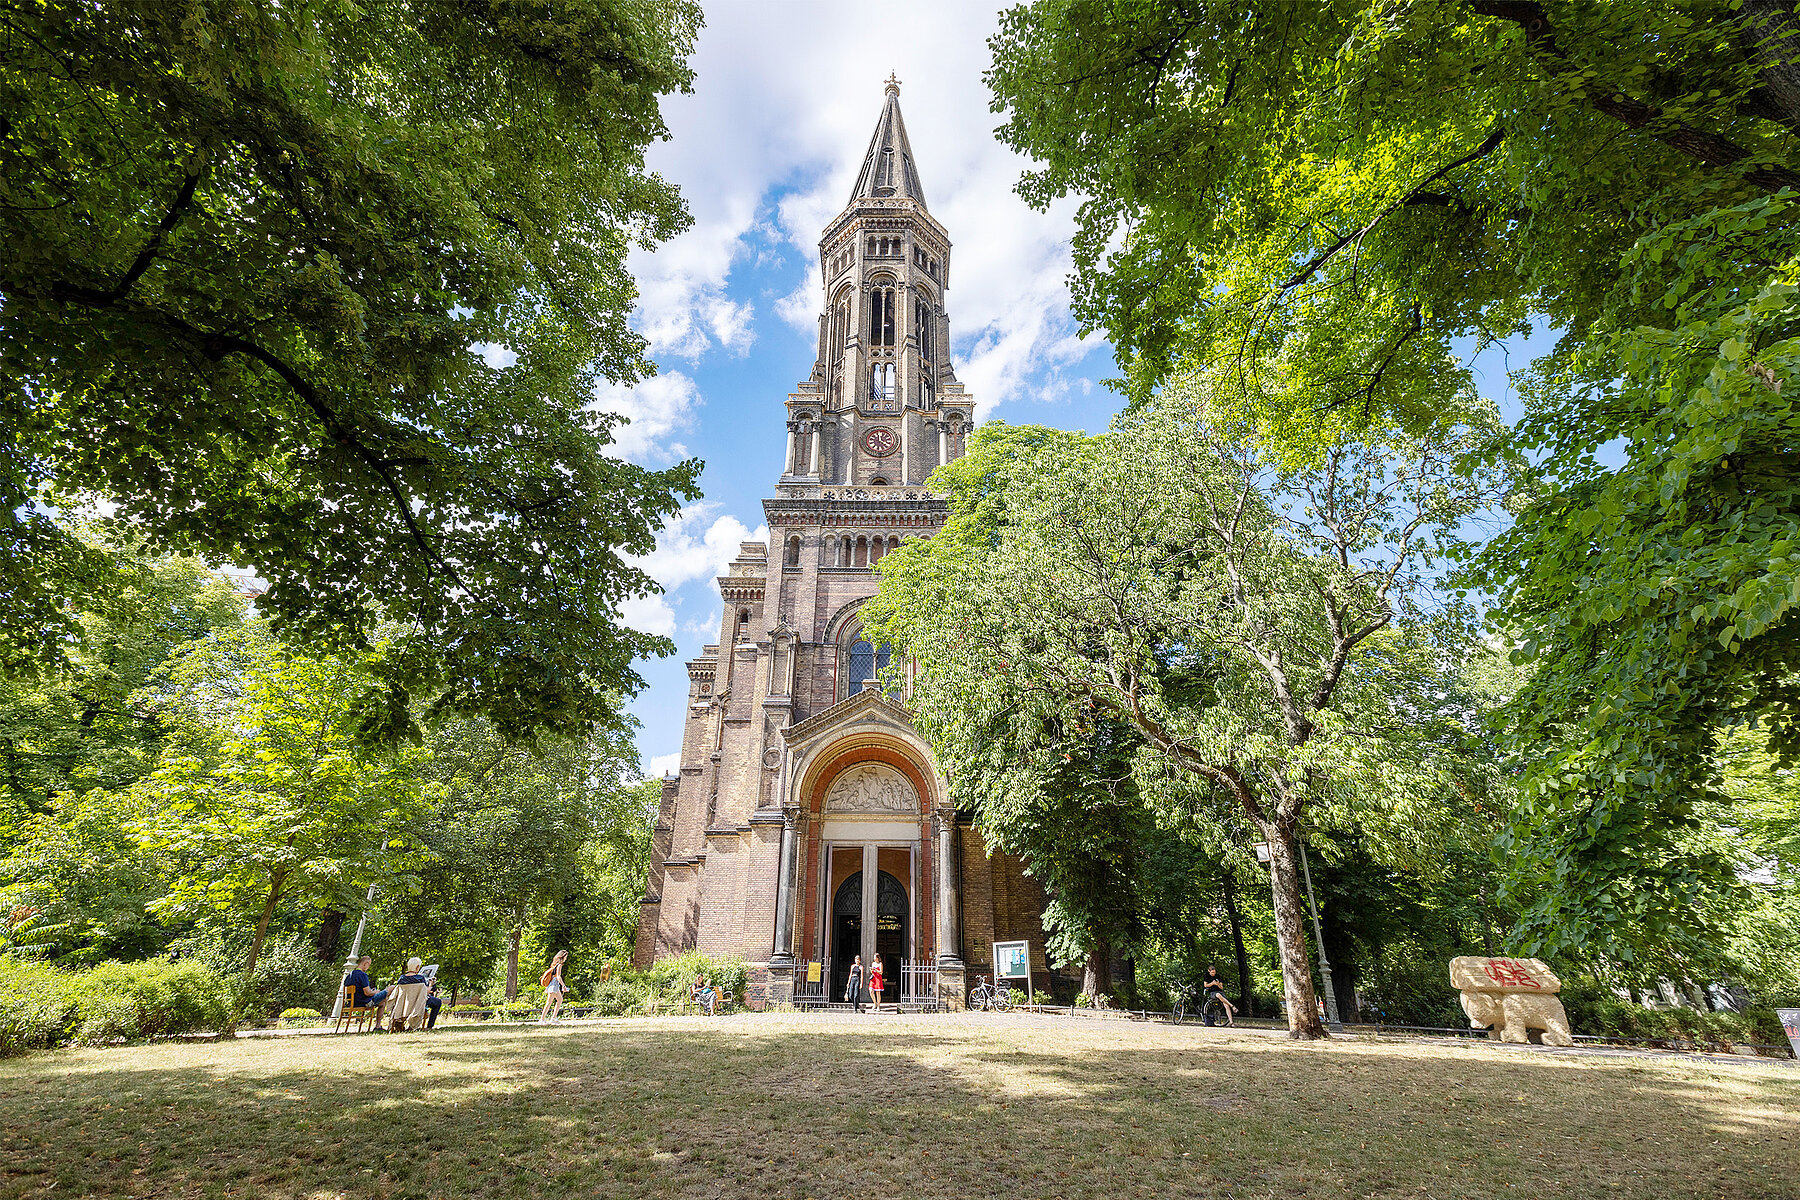 The Zionskirche surrounded by green trees.